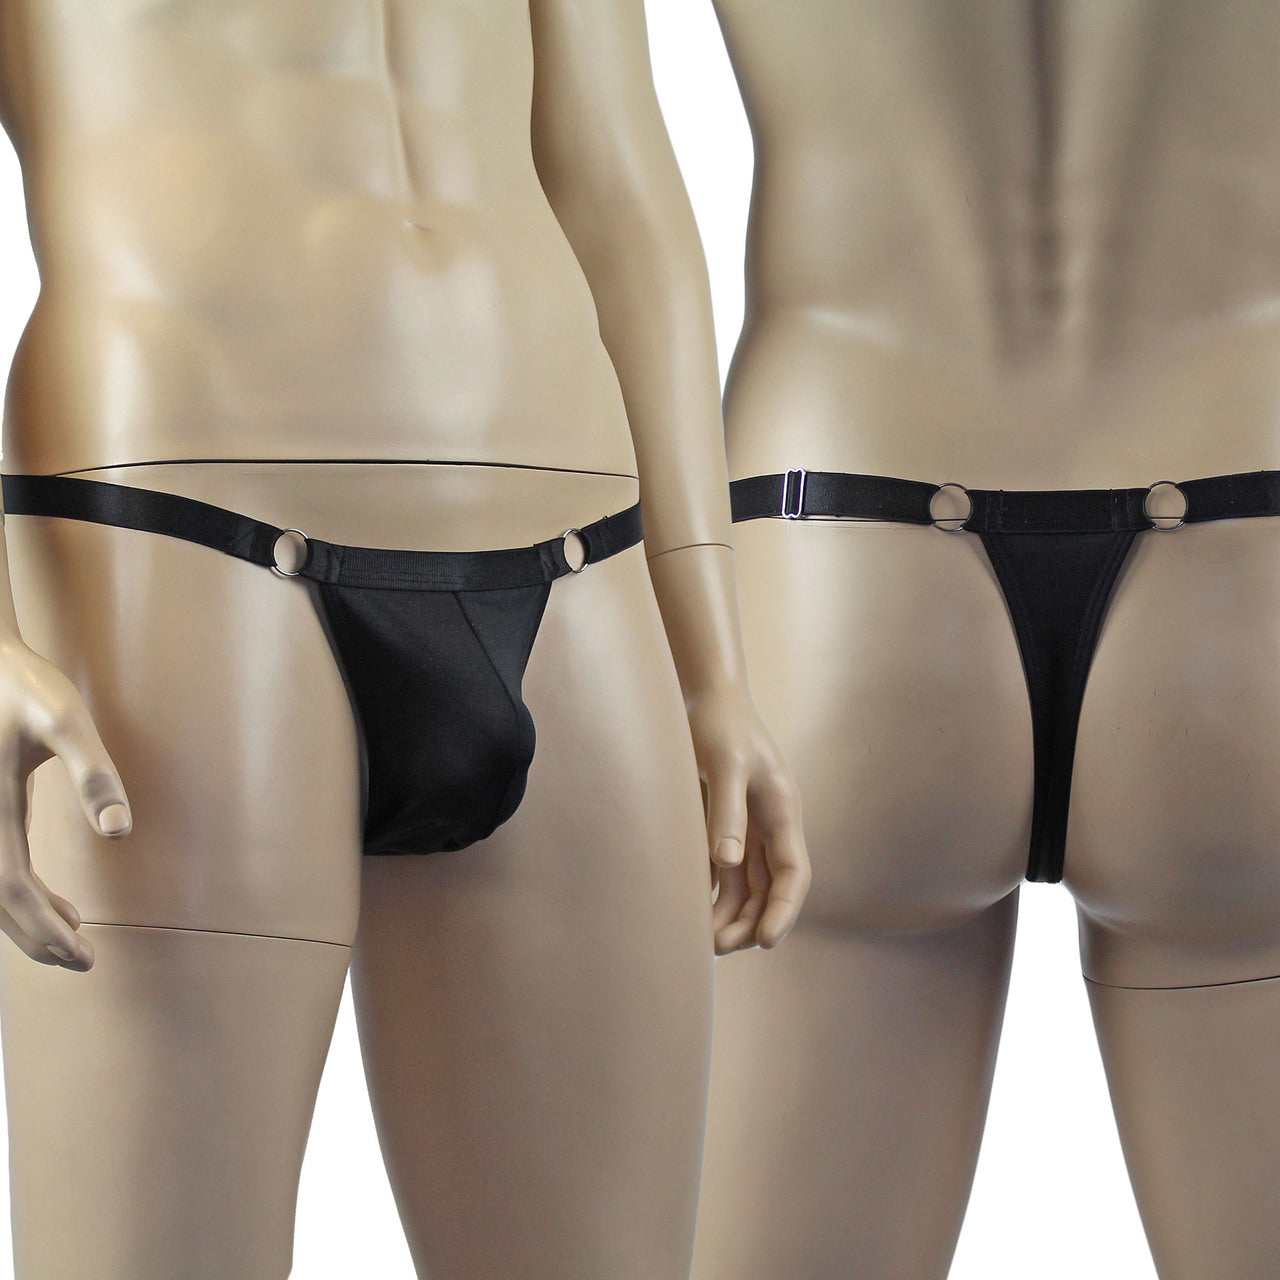 Male Spandex Thong with Ring Sides and Adjustable Strap Black